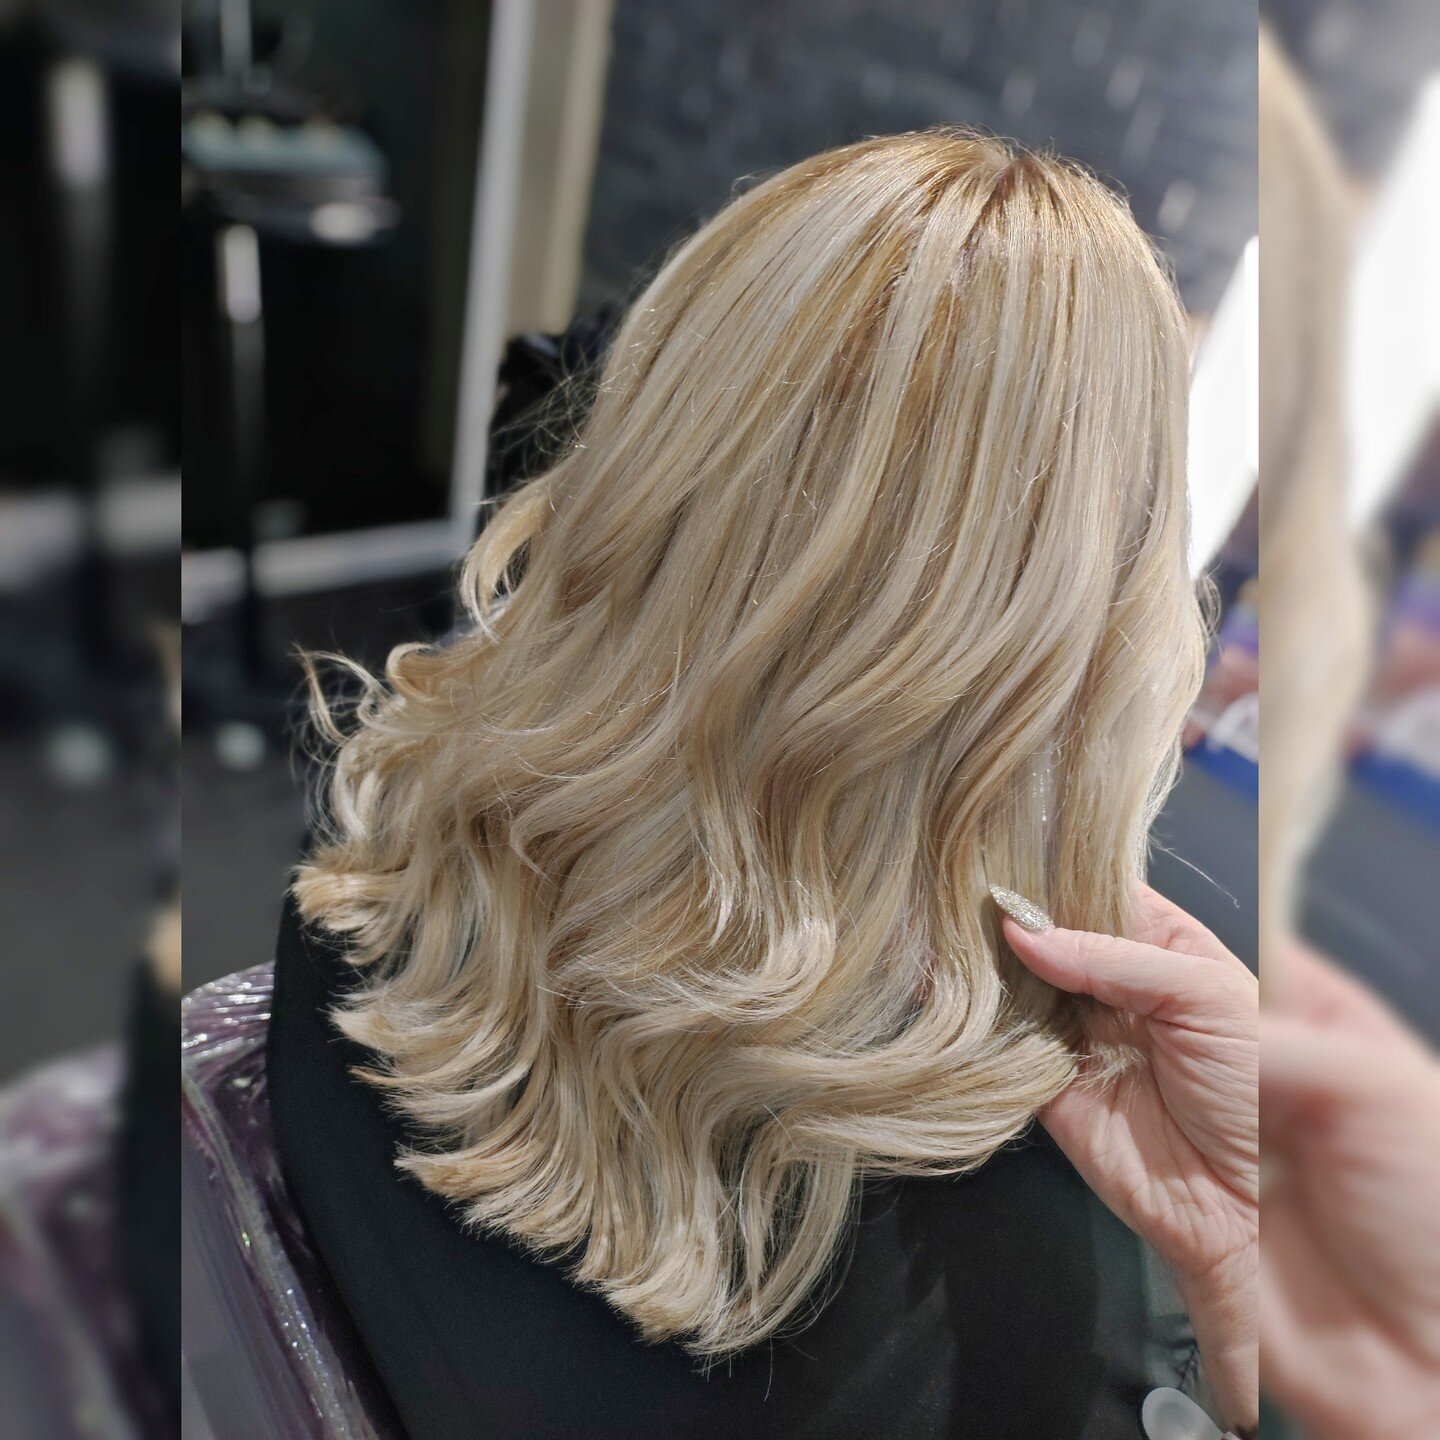 Taking the lovely Leanne from a full head highlights to a full head blonde with a root tap 😍
.
.
.
hair by @alison_touchedhb 
.
.
@olaplex @labelmworld @ghdhair @wellahairuki